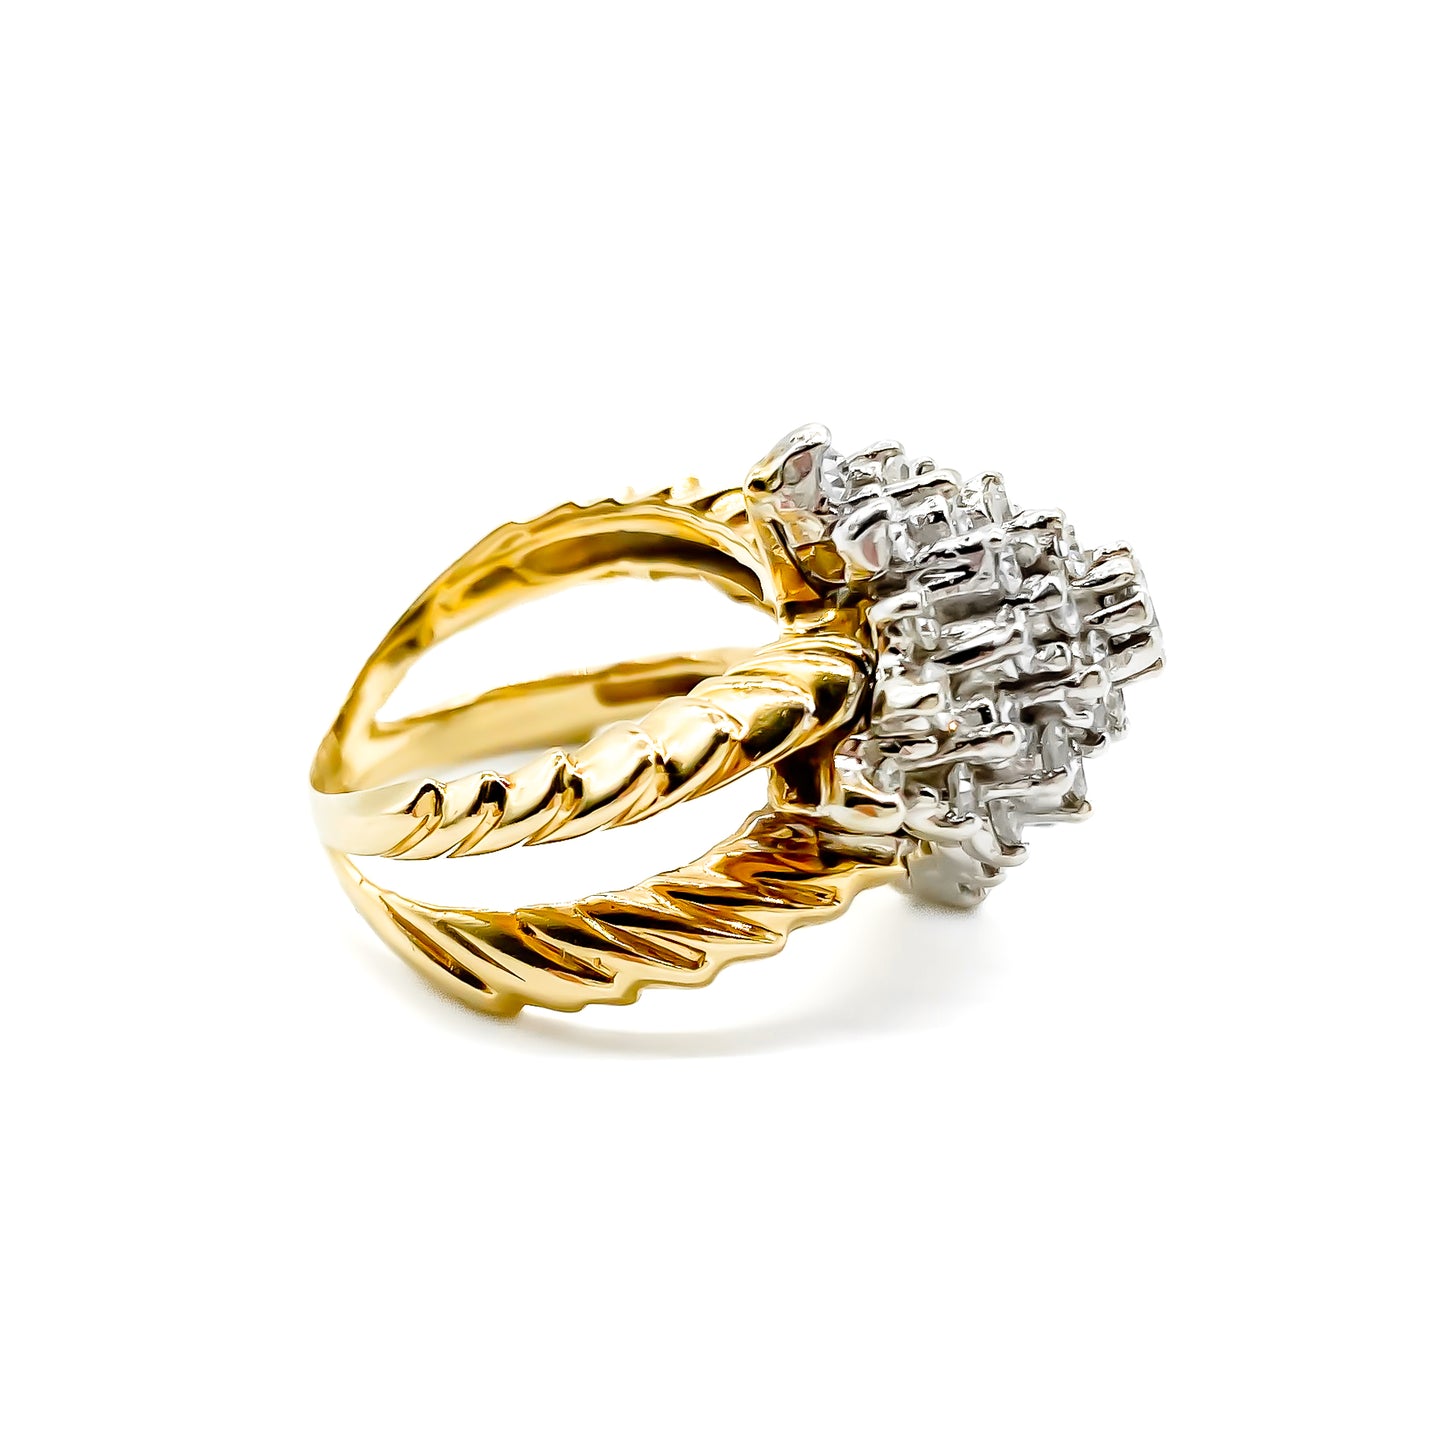 Stunning 14ct yellow gold cocktail ring set with thirty-seven diamonds in white gold tier setting.